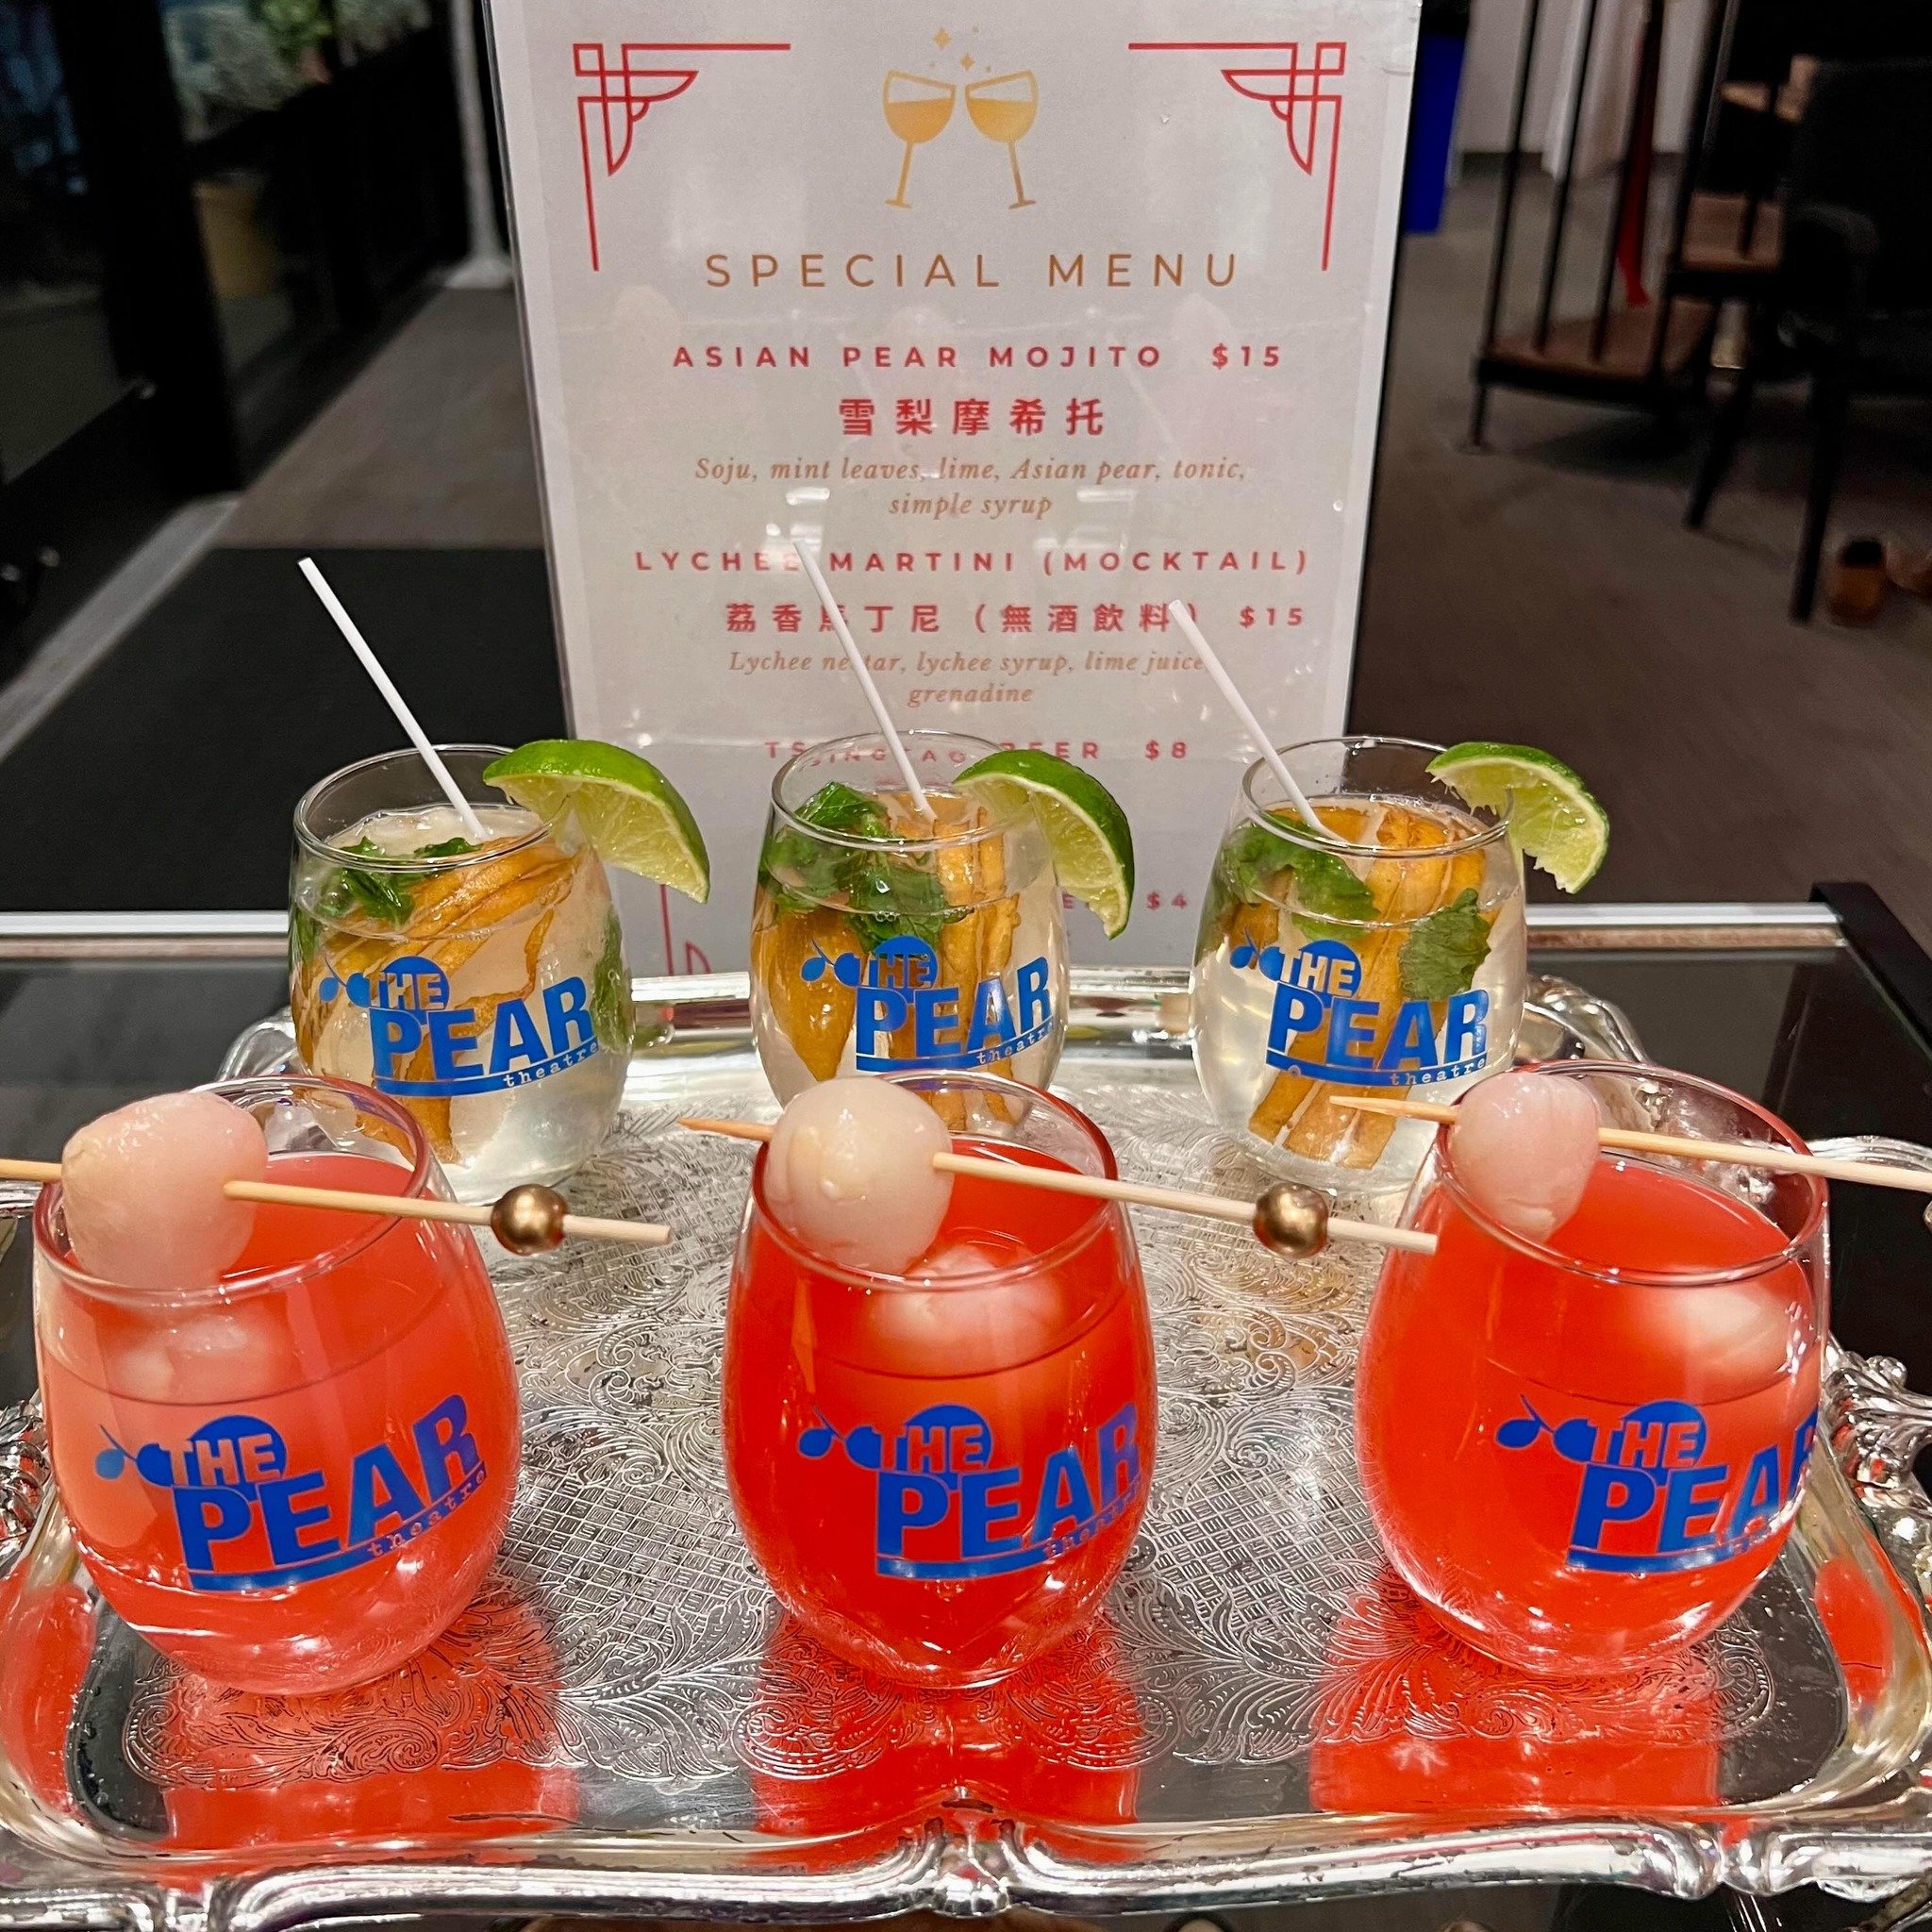 Happy Friday! Visiting The Pear for a show this weekend? Stop by our concessions stand to order one (or two!) of our special show-themed drinks! 

Be sure to also check your production program for our Pear patron social media challenge that earns you